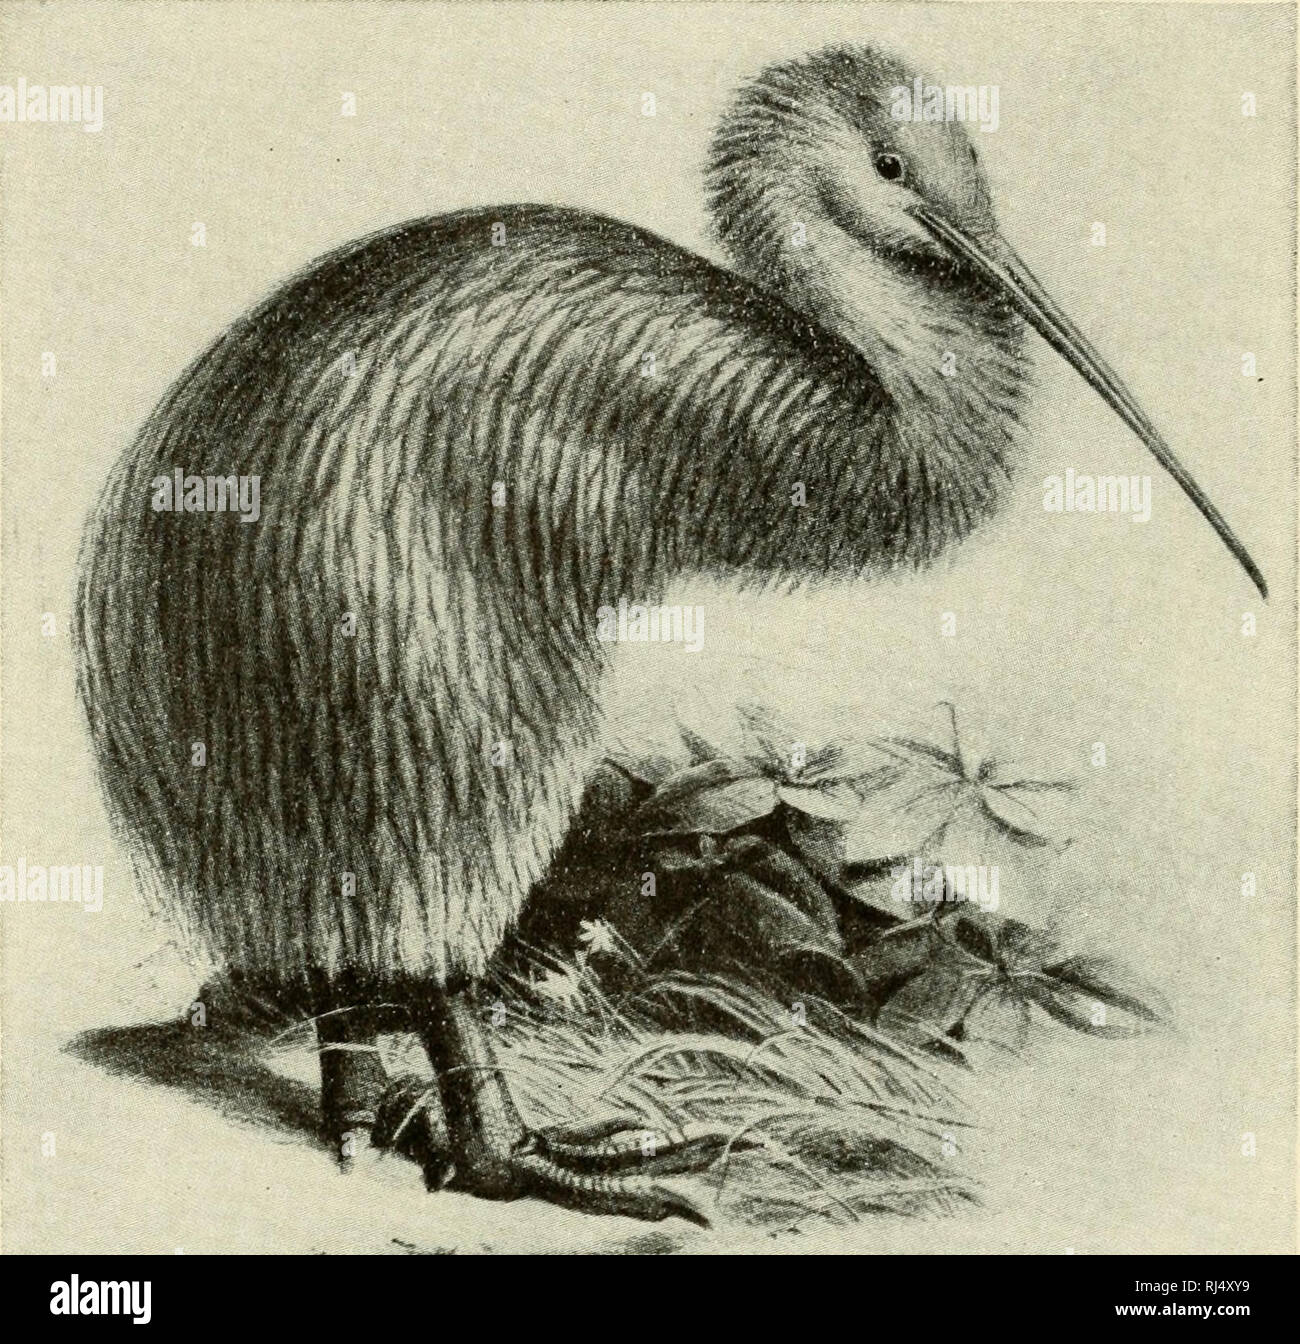 . The chordates. Chordata. 546 Comparative Morphology of Chor. Fig. 421. New Zealand kiwi, Apleryx australis. (Courtesy, Knowlton and Ridgway: &quot;Birds of the World,&quot; New York, Henry Holt &amp; Co., Inc.) Order 11. Anseriformes: Ducks, geese, swans; swimmers and waders; short legs, webbed feet; with few exceptions, strong fliers. Order 12. Falconiformes: Falcons, eagles, hawks, buzzards (Fig. 428), vultures; carnivorous; hooked bill and long-clawed toes adapted for capture and rending of prey; strong fliers. Order 13. Galliformes: Mostly ground birds and poor fliers; quails, pheasants, Stock Photo